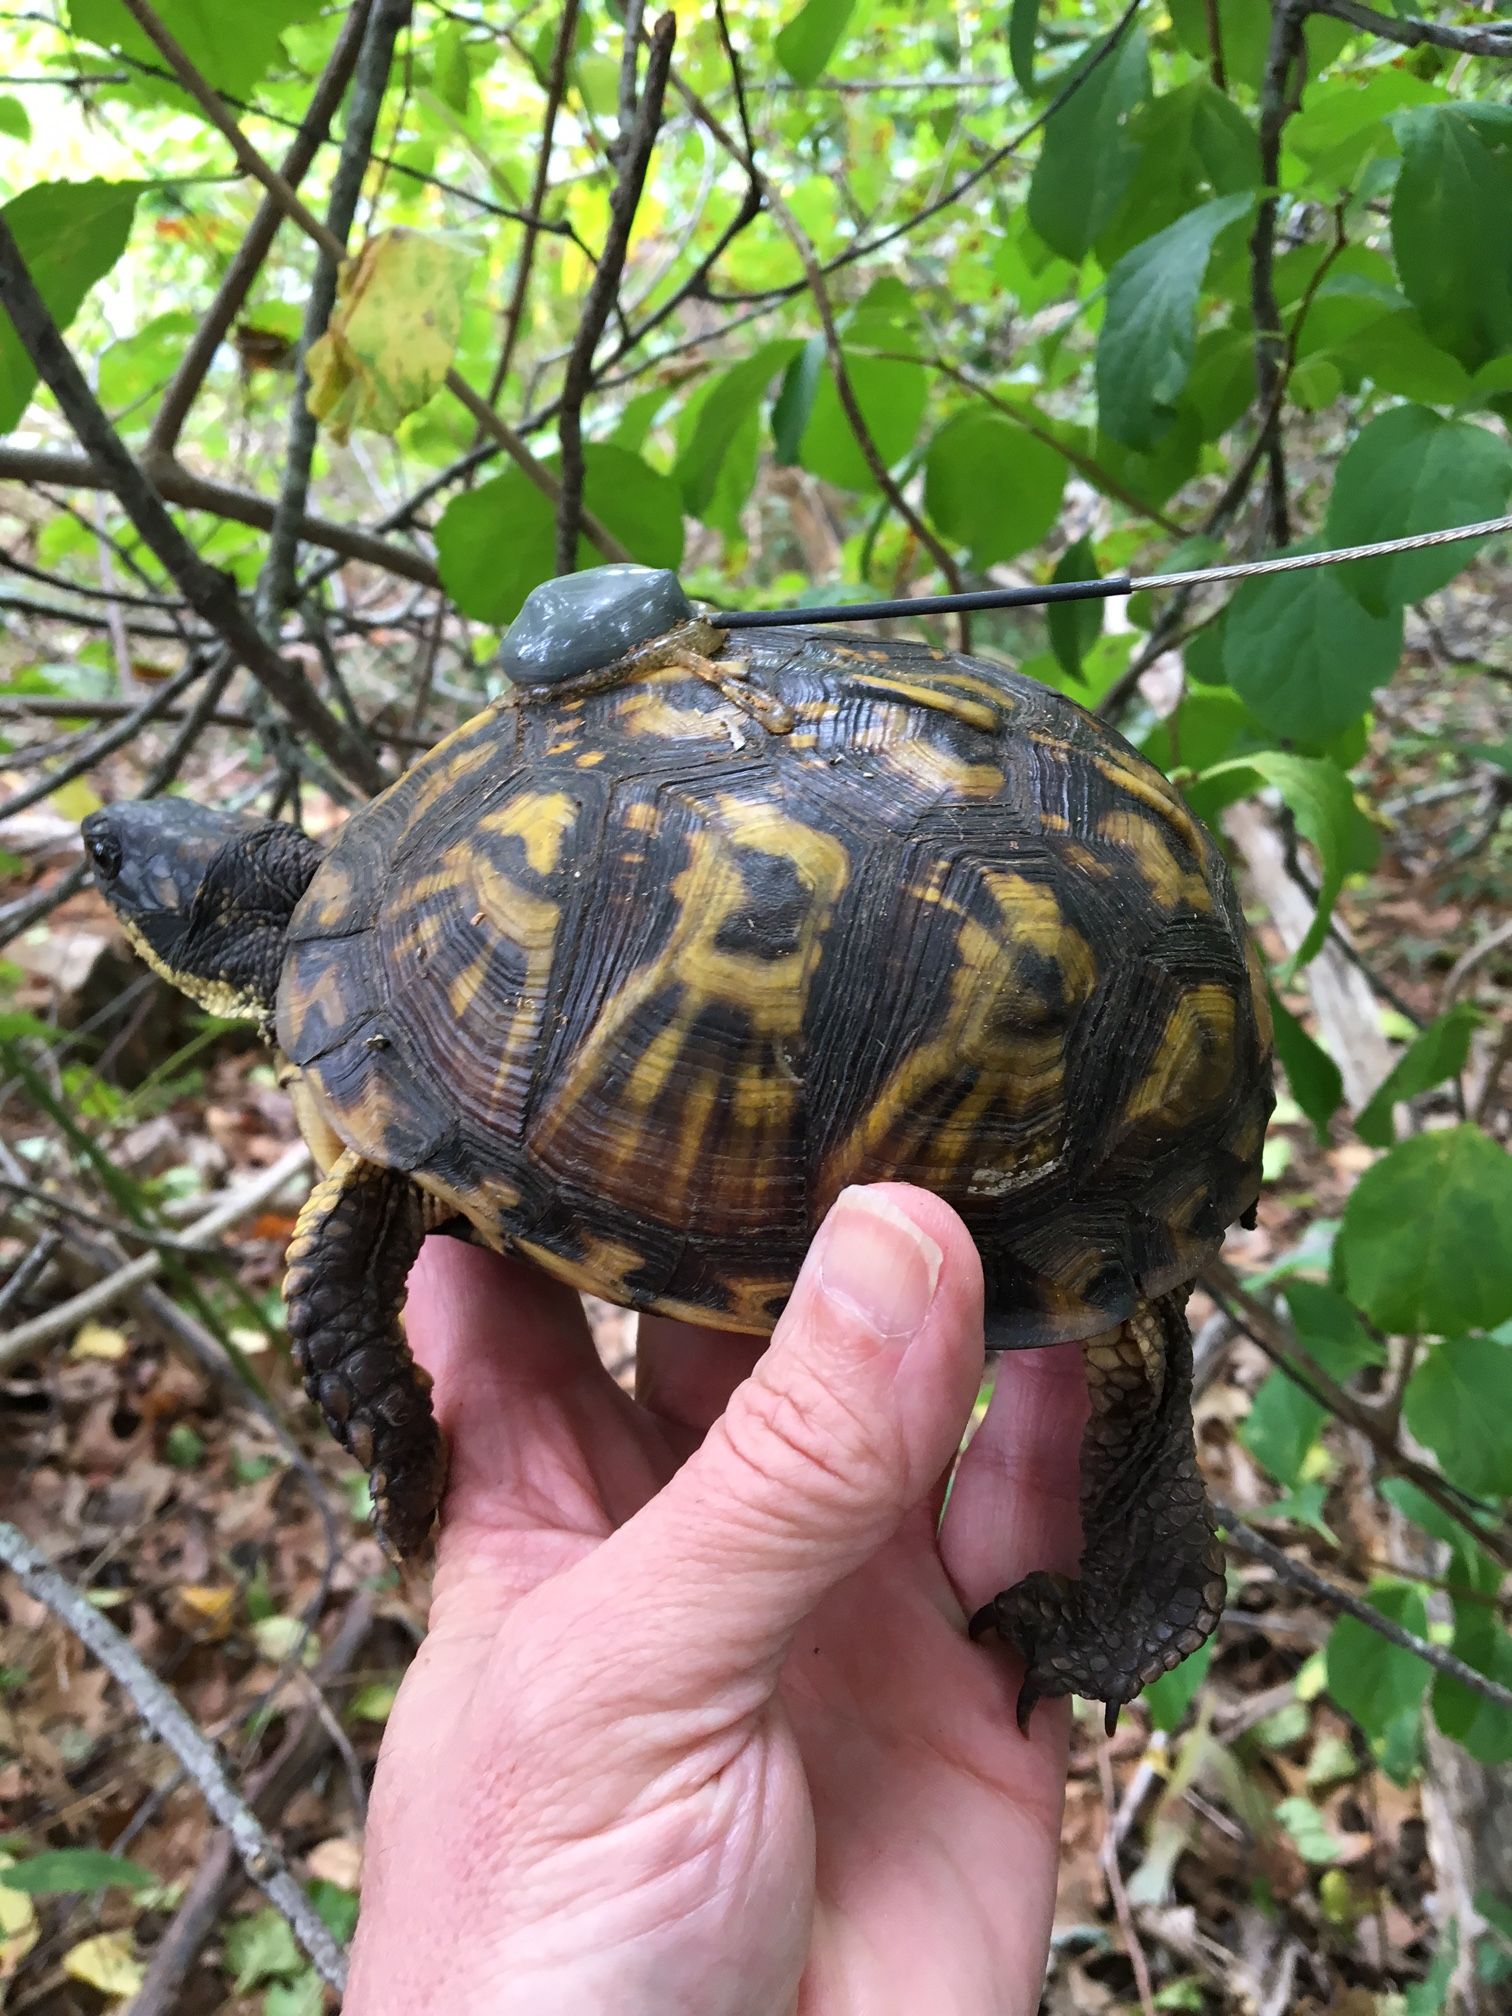 Box Turtle 709 with her radio transmitter attached. (photo by Tim O'Brien)